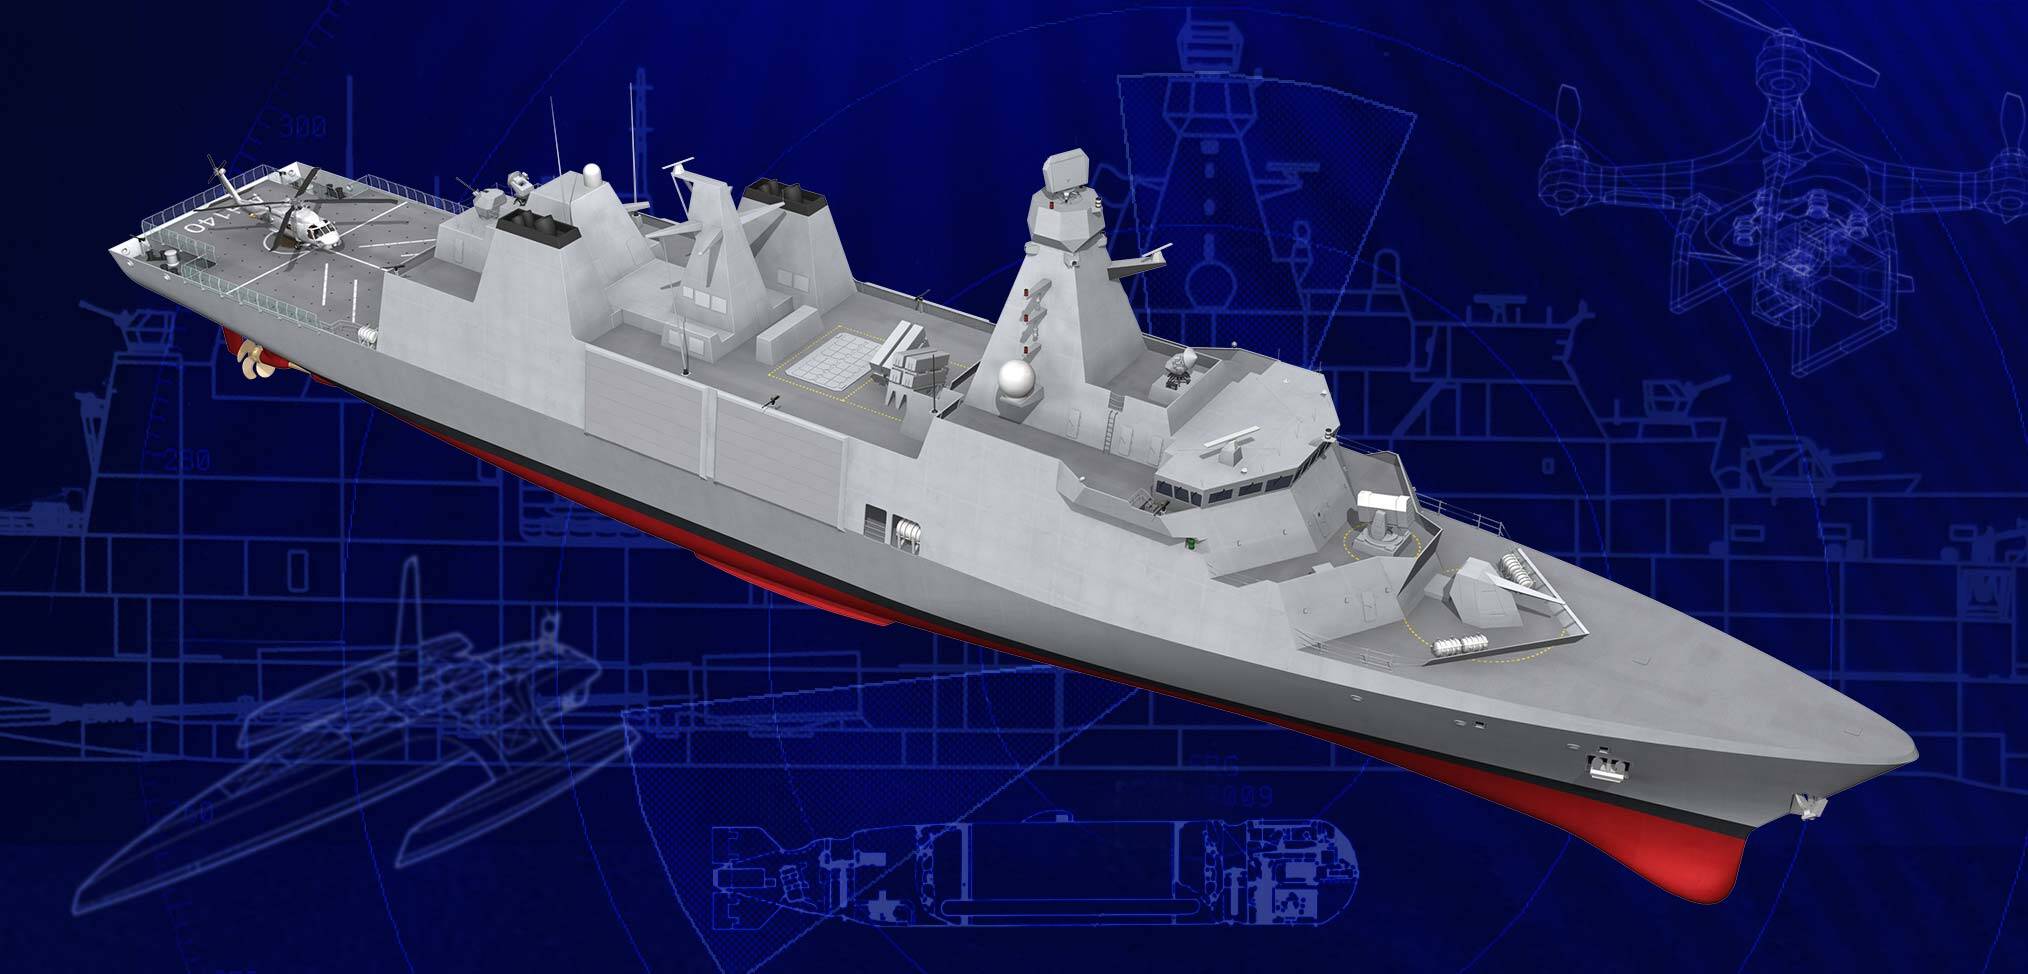 Real hope for a bigger Royal Navy – the Type 32 frigate concept